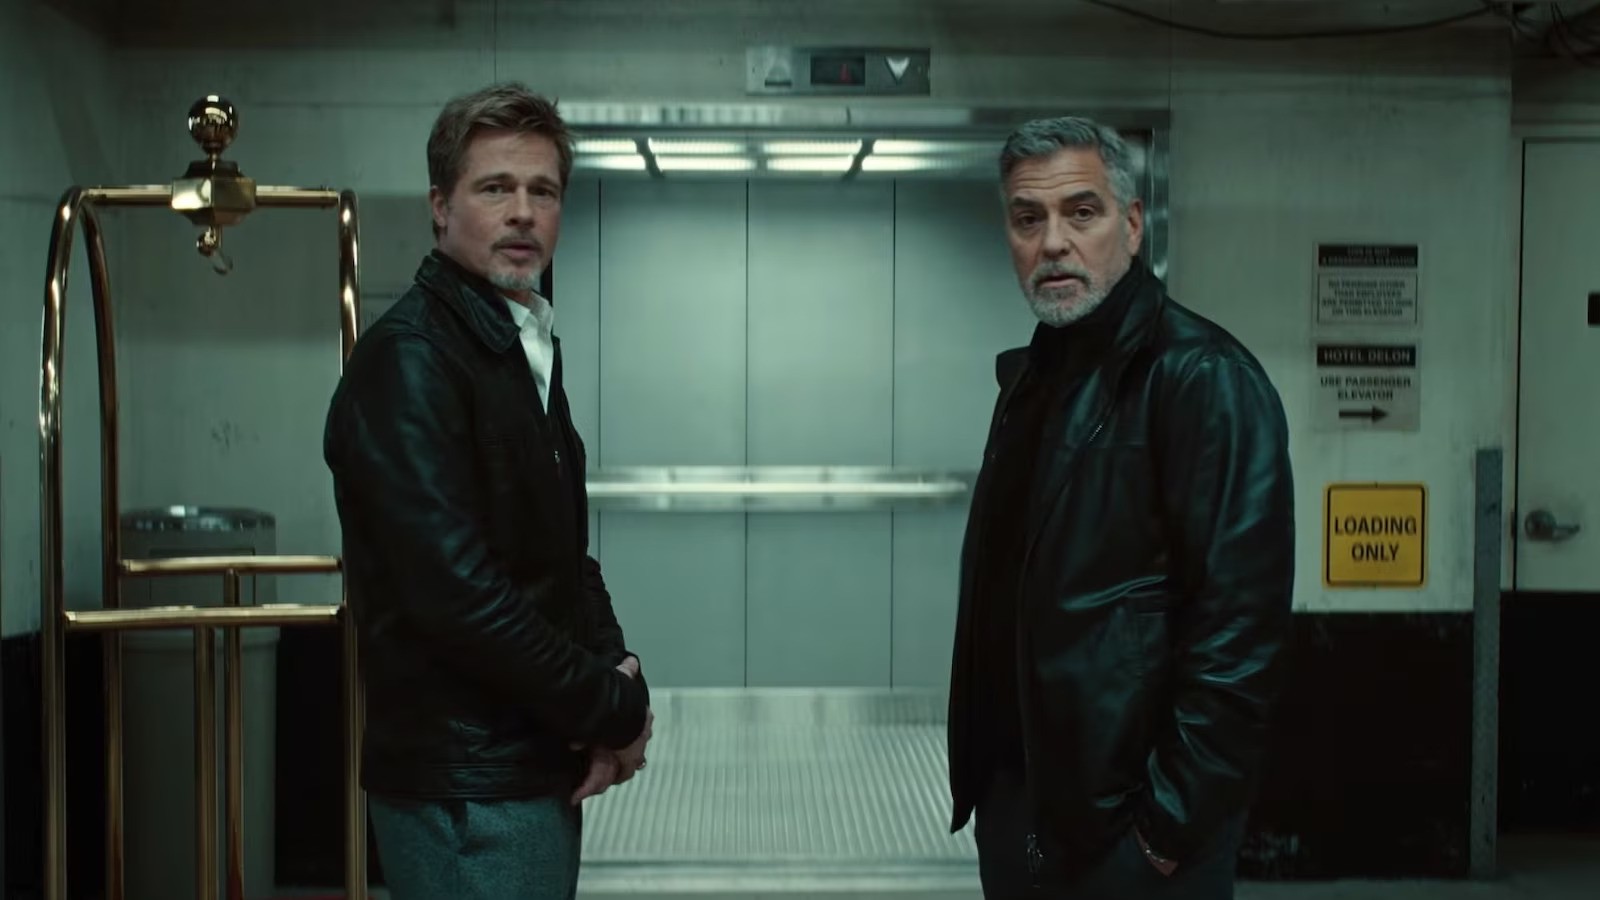 Before his F1 film next year, Brad Pitt will star in Wolfs with George Clooney | Columbia Pictures